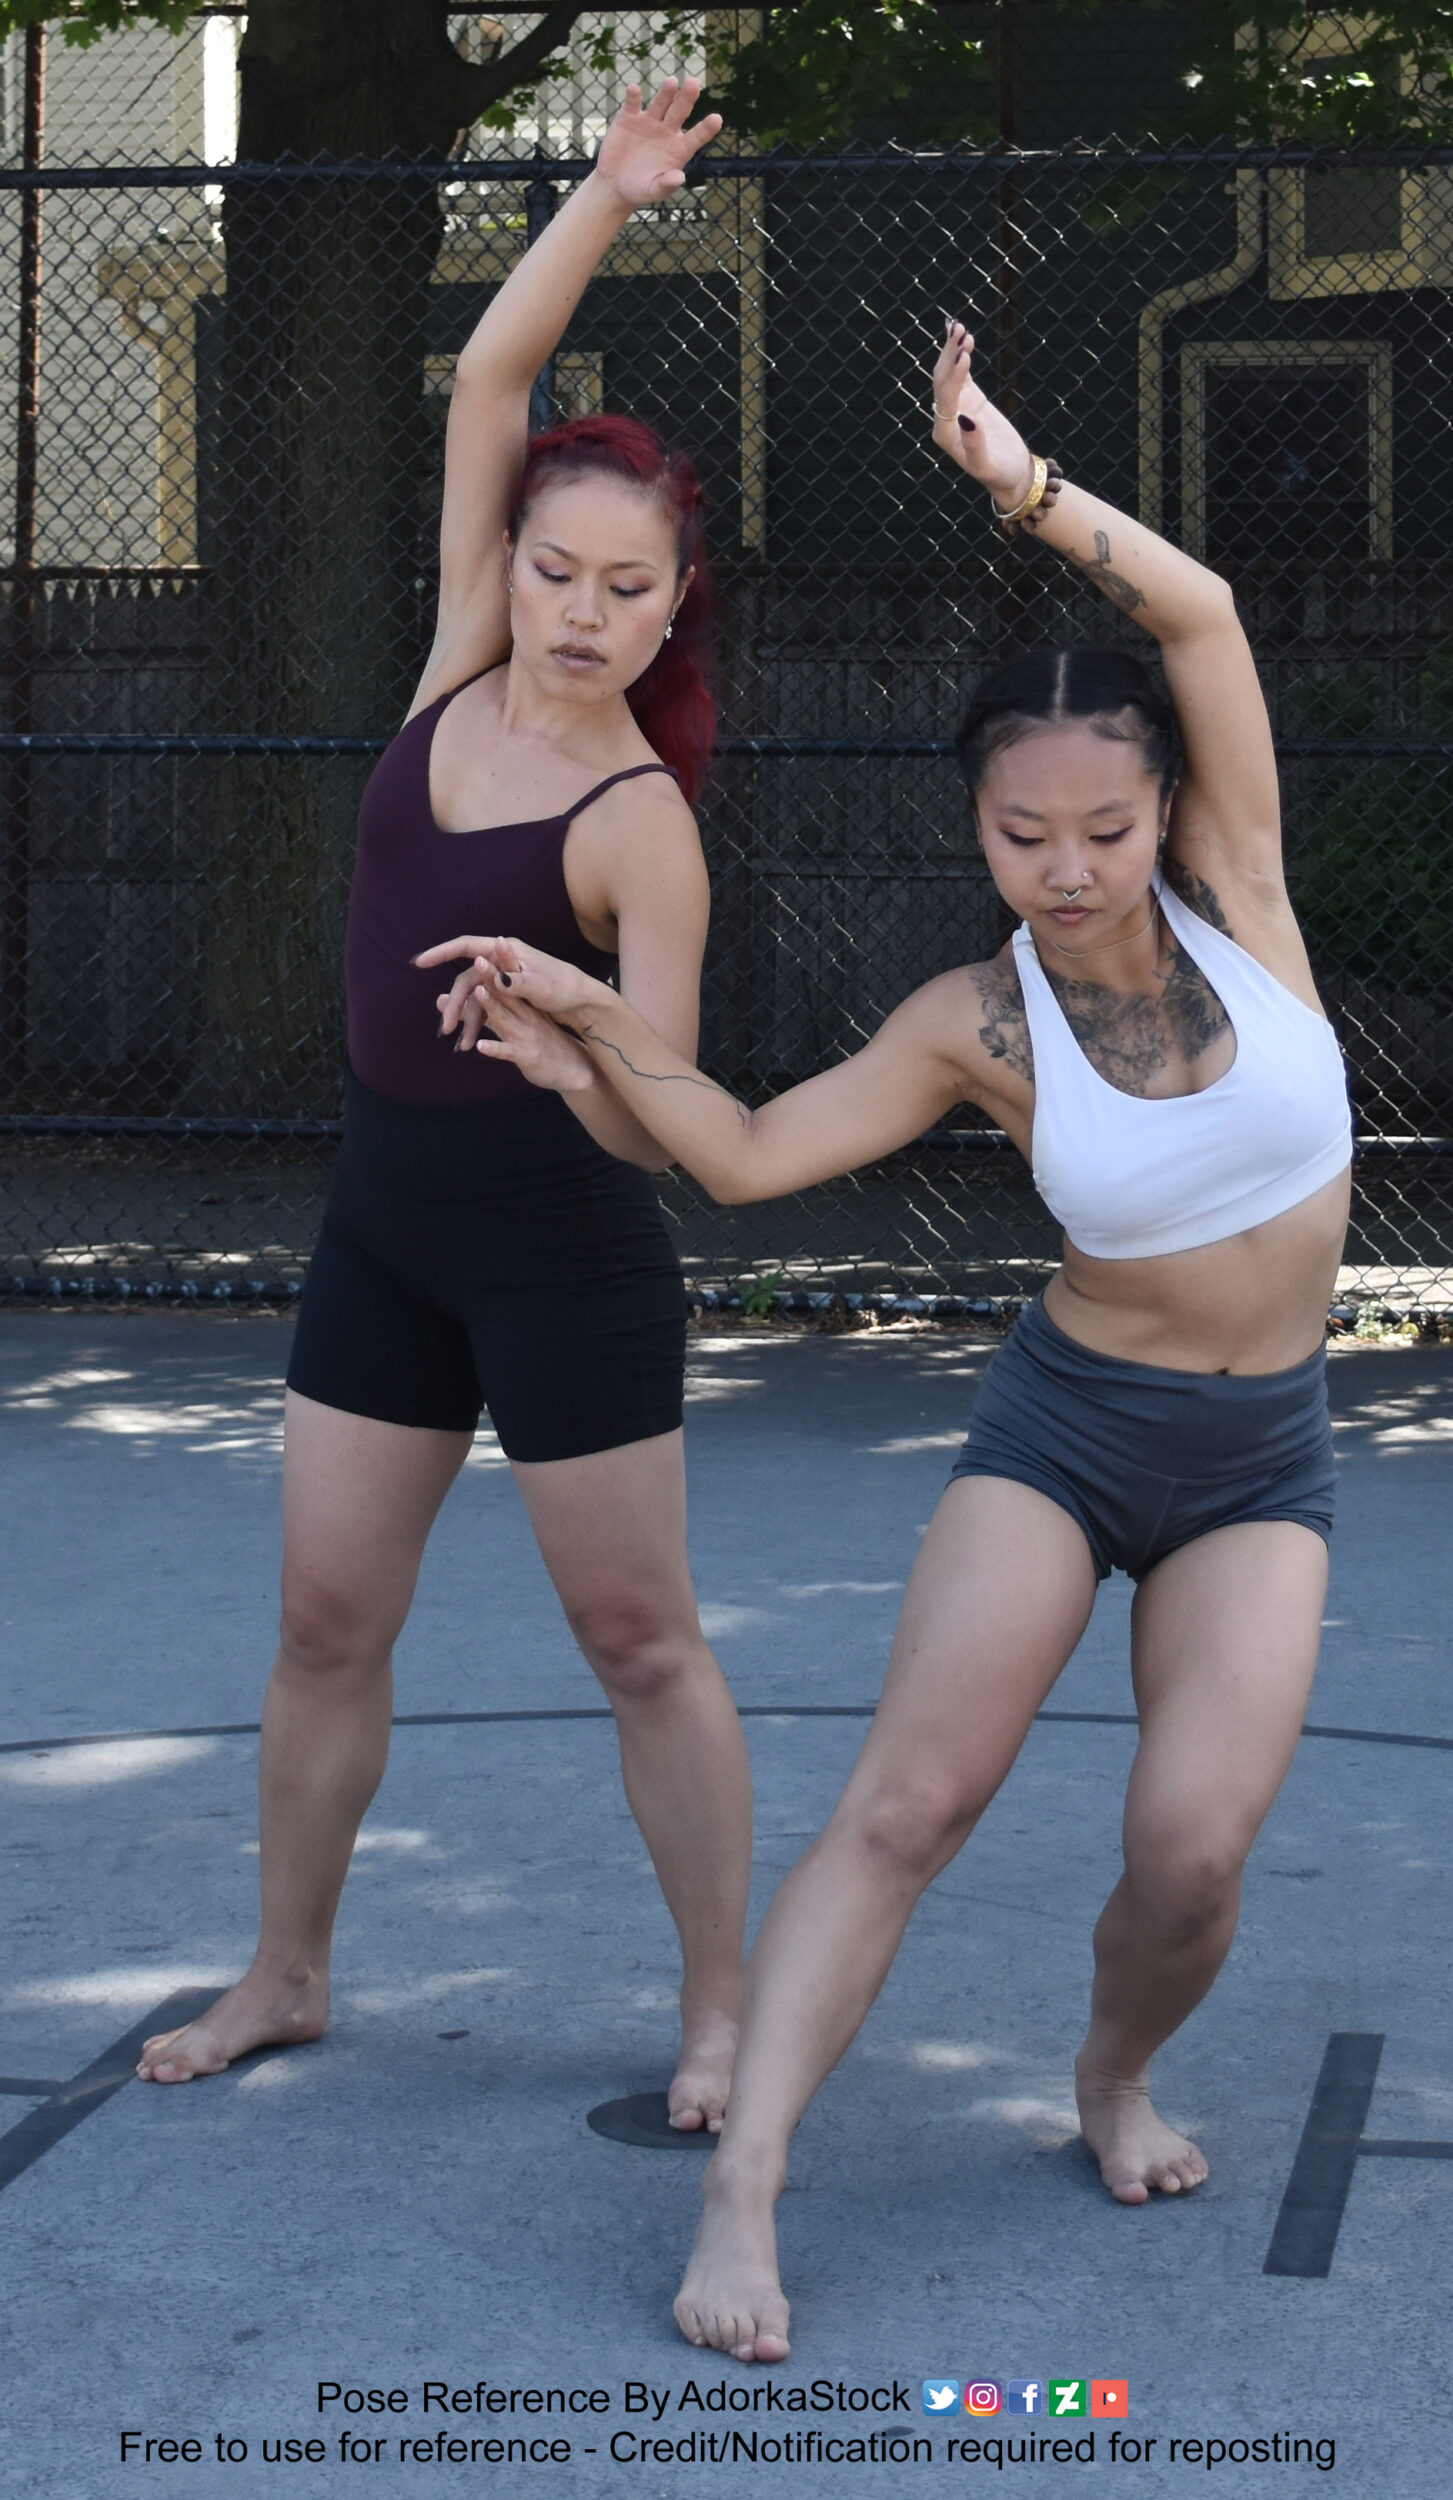 Two thin, Asian, female pose reference models in dancers poses with hands linked.